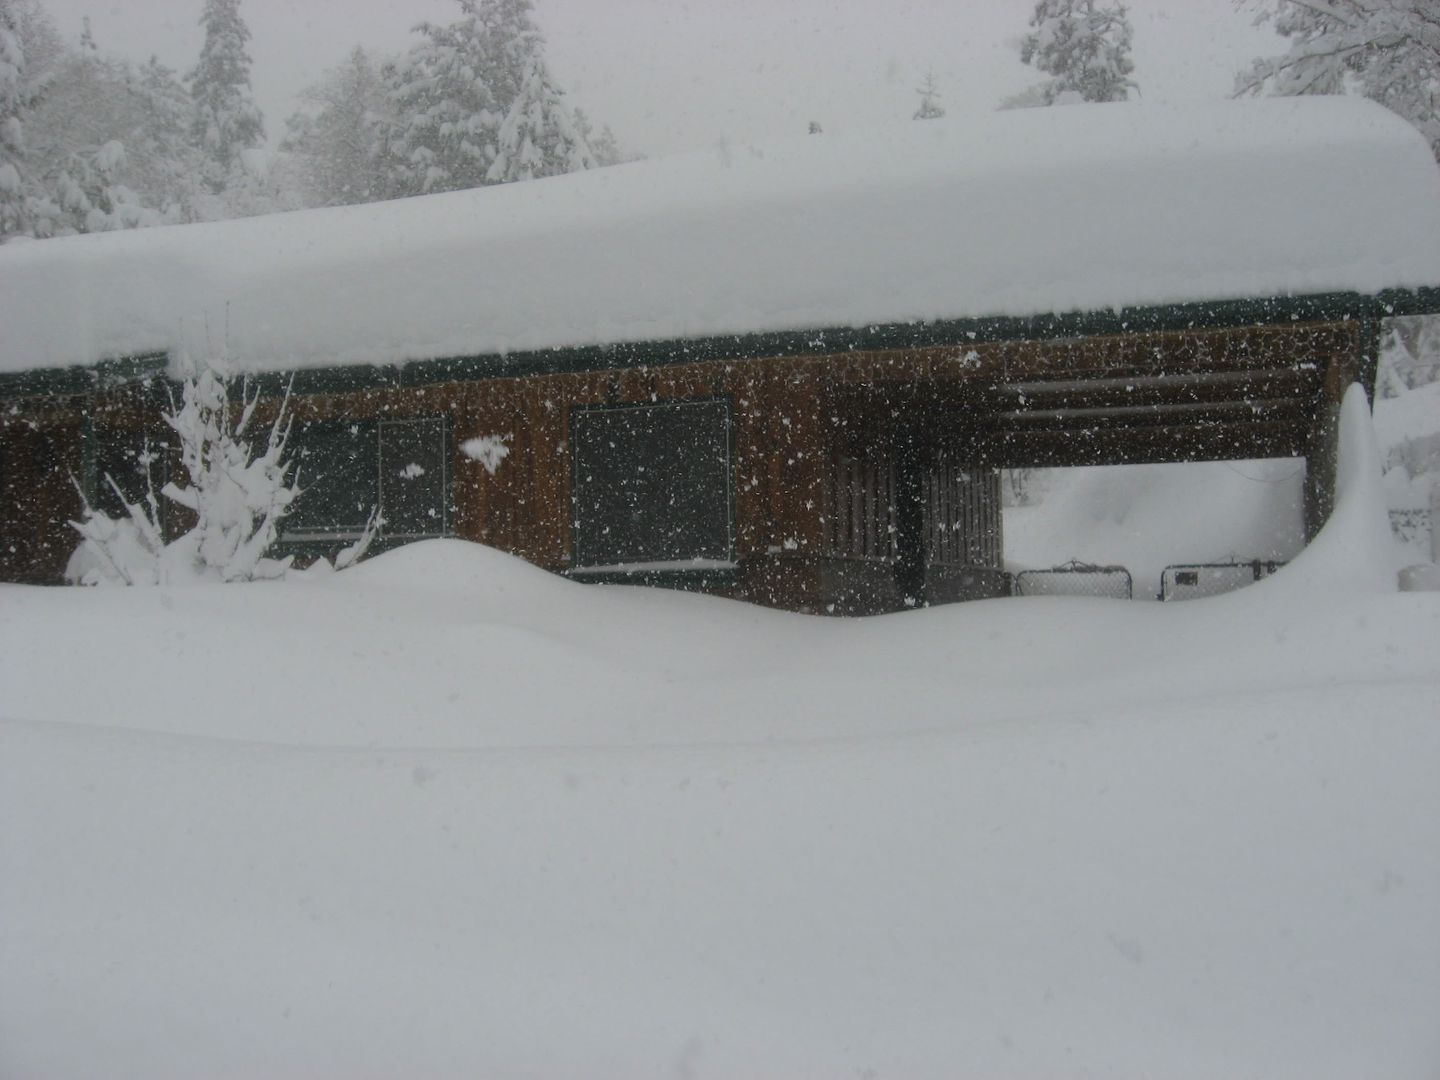 snow storm in Big Bear results in a state of emergency according to the governator